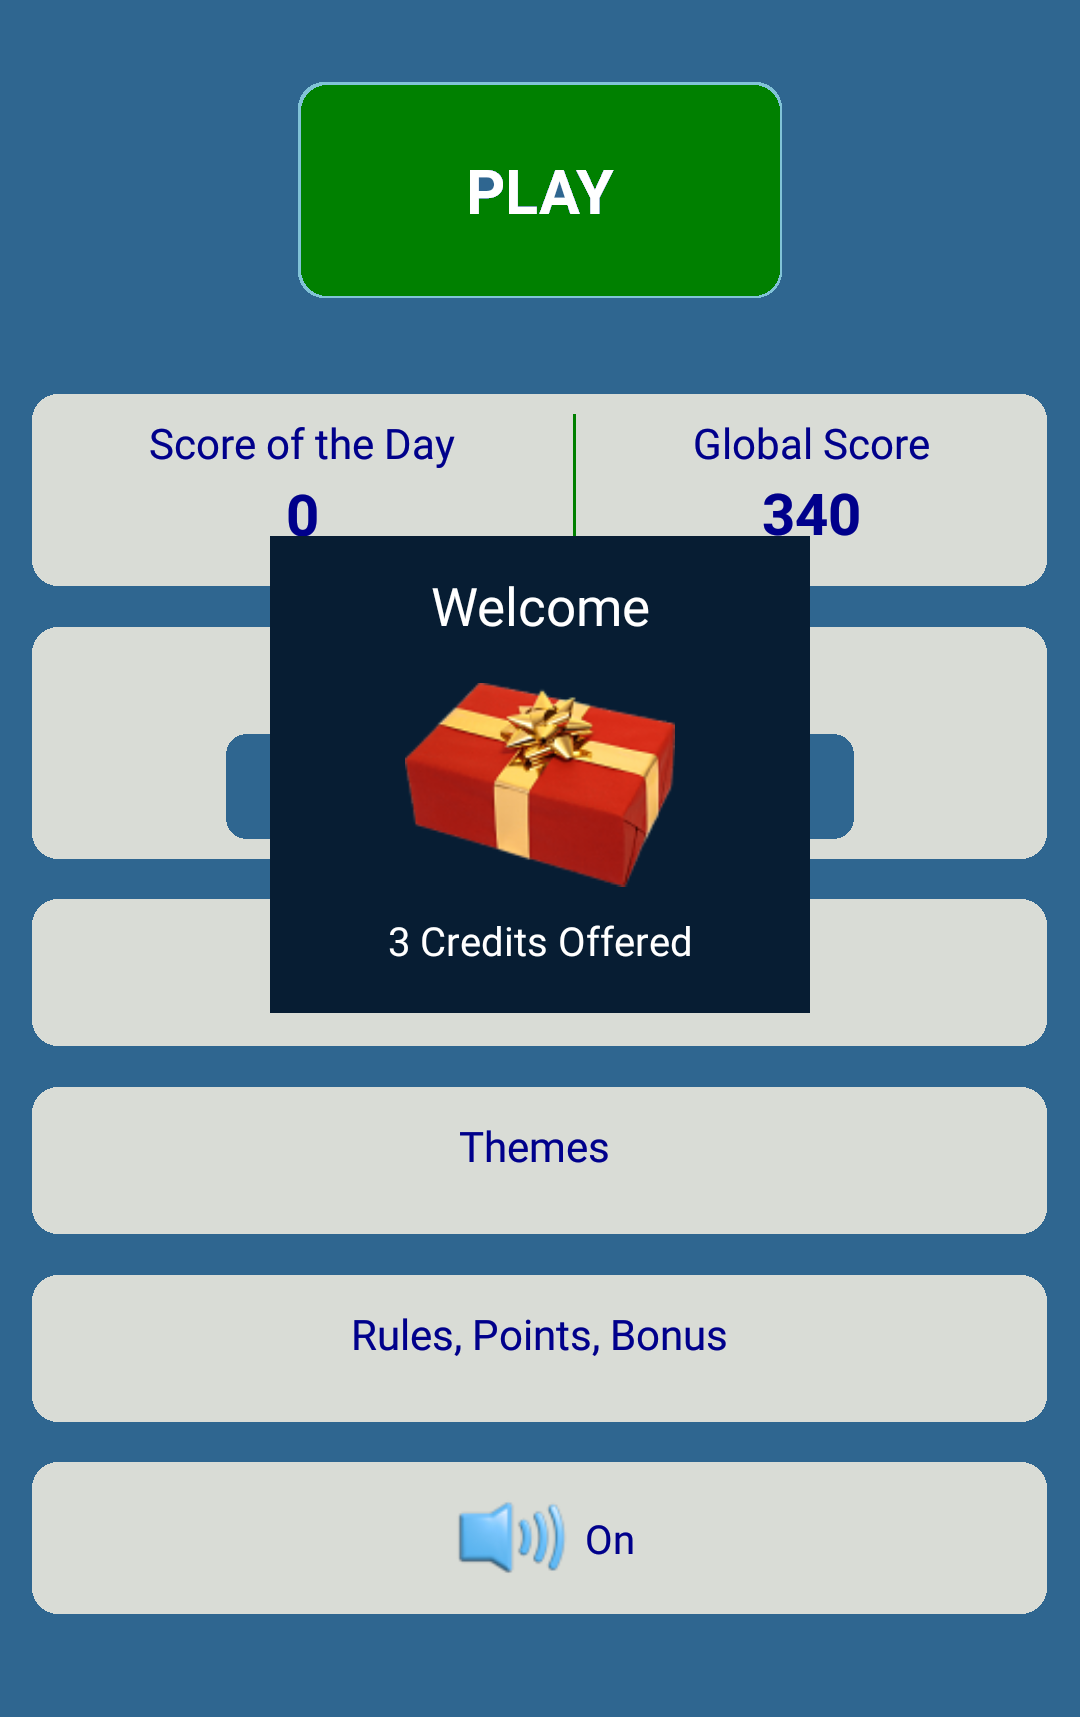 PLAYSCORE APK (Android App) - Free Download